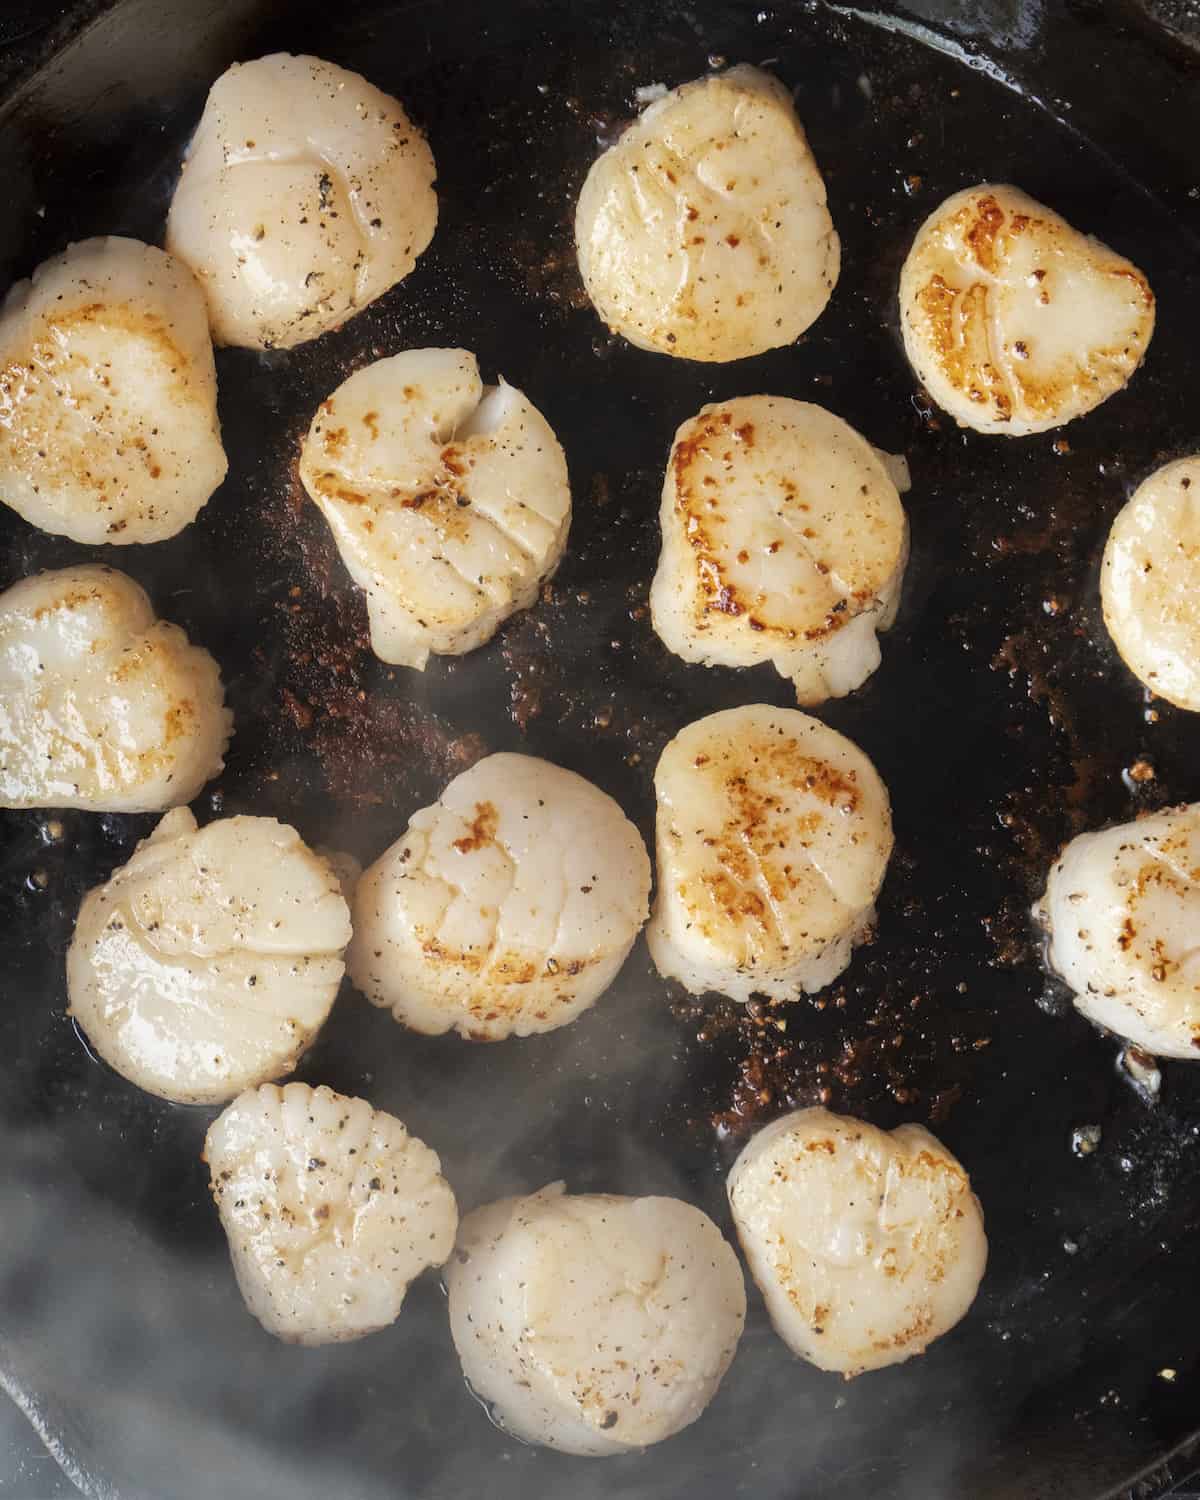 15 seared scallops on a cast iron skillet